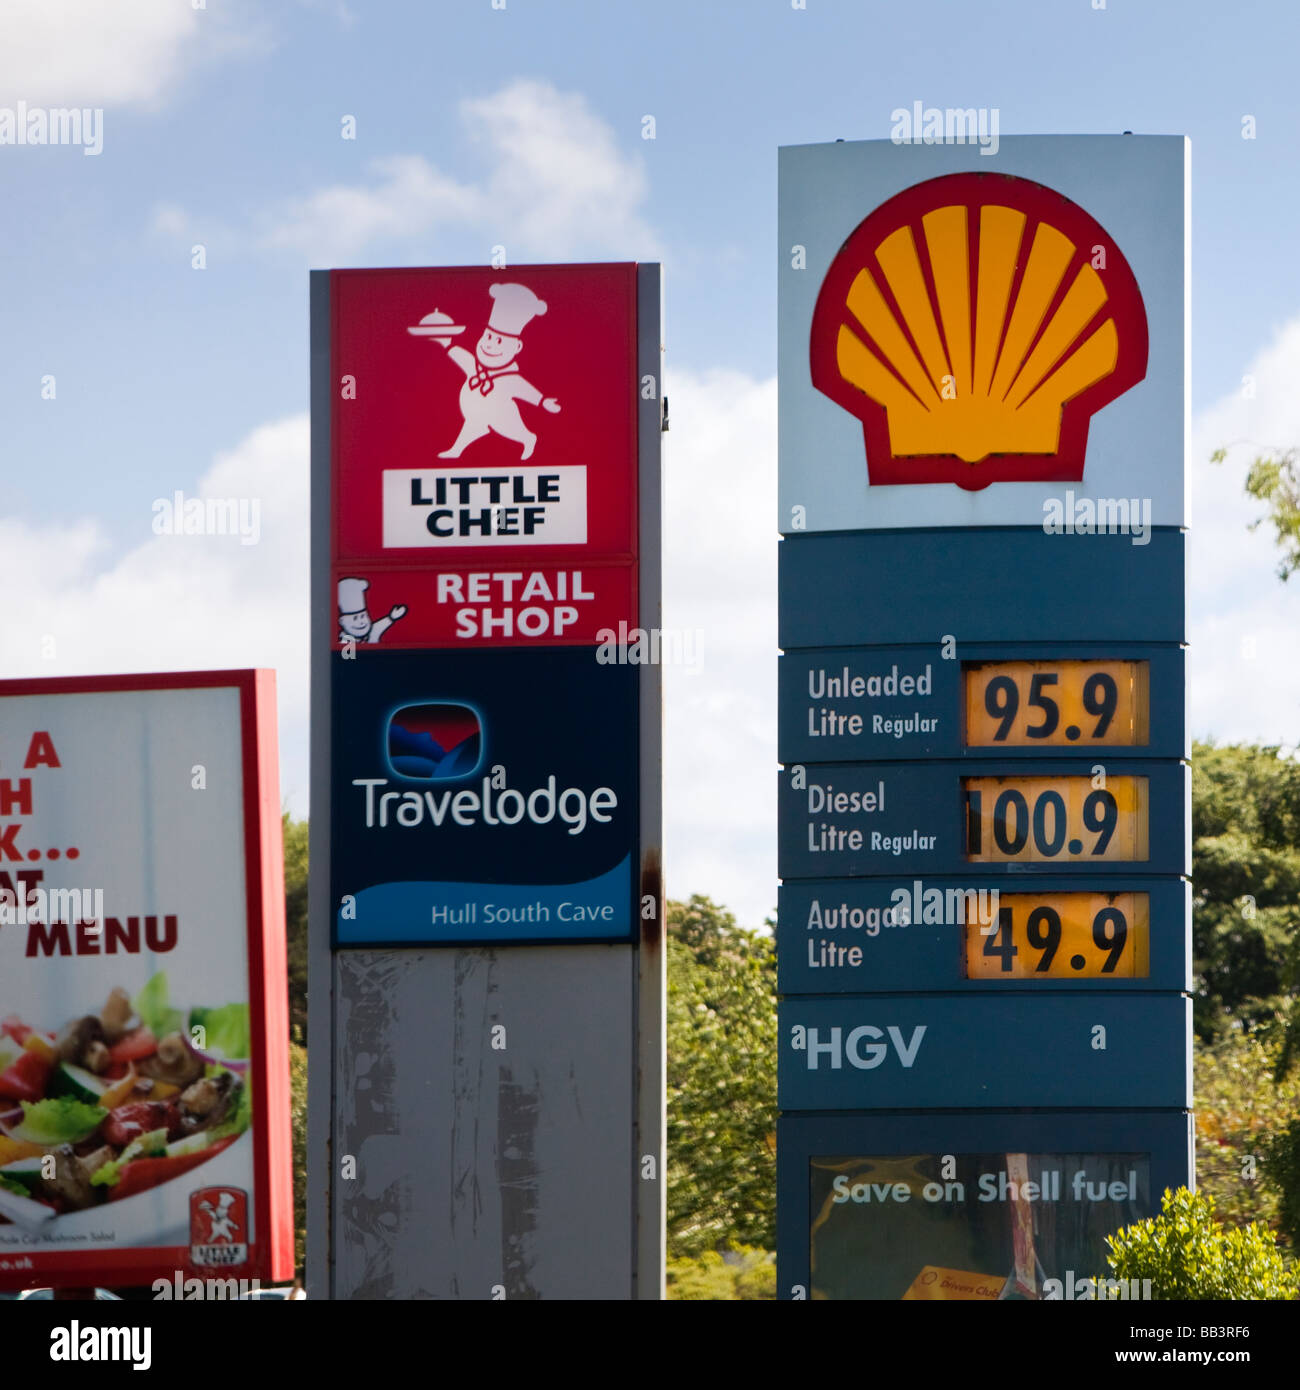 Petrol and roadside service area signage with autogas and services signs England UK Stock Photo